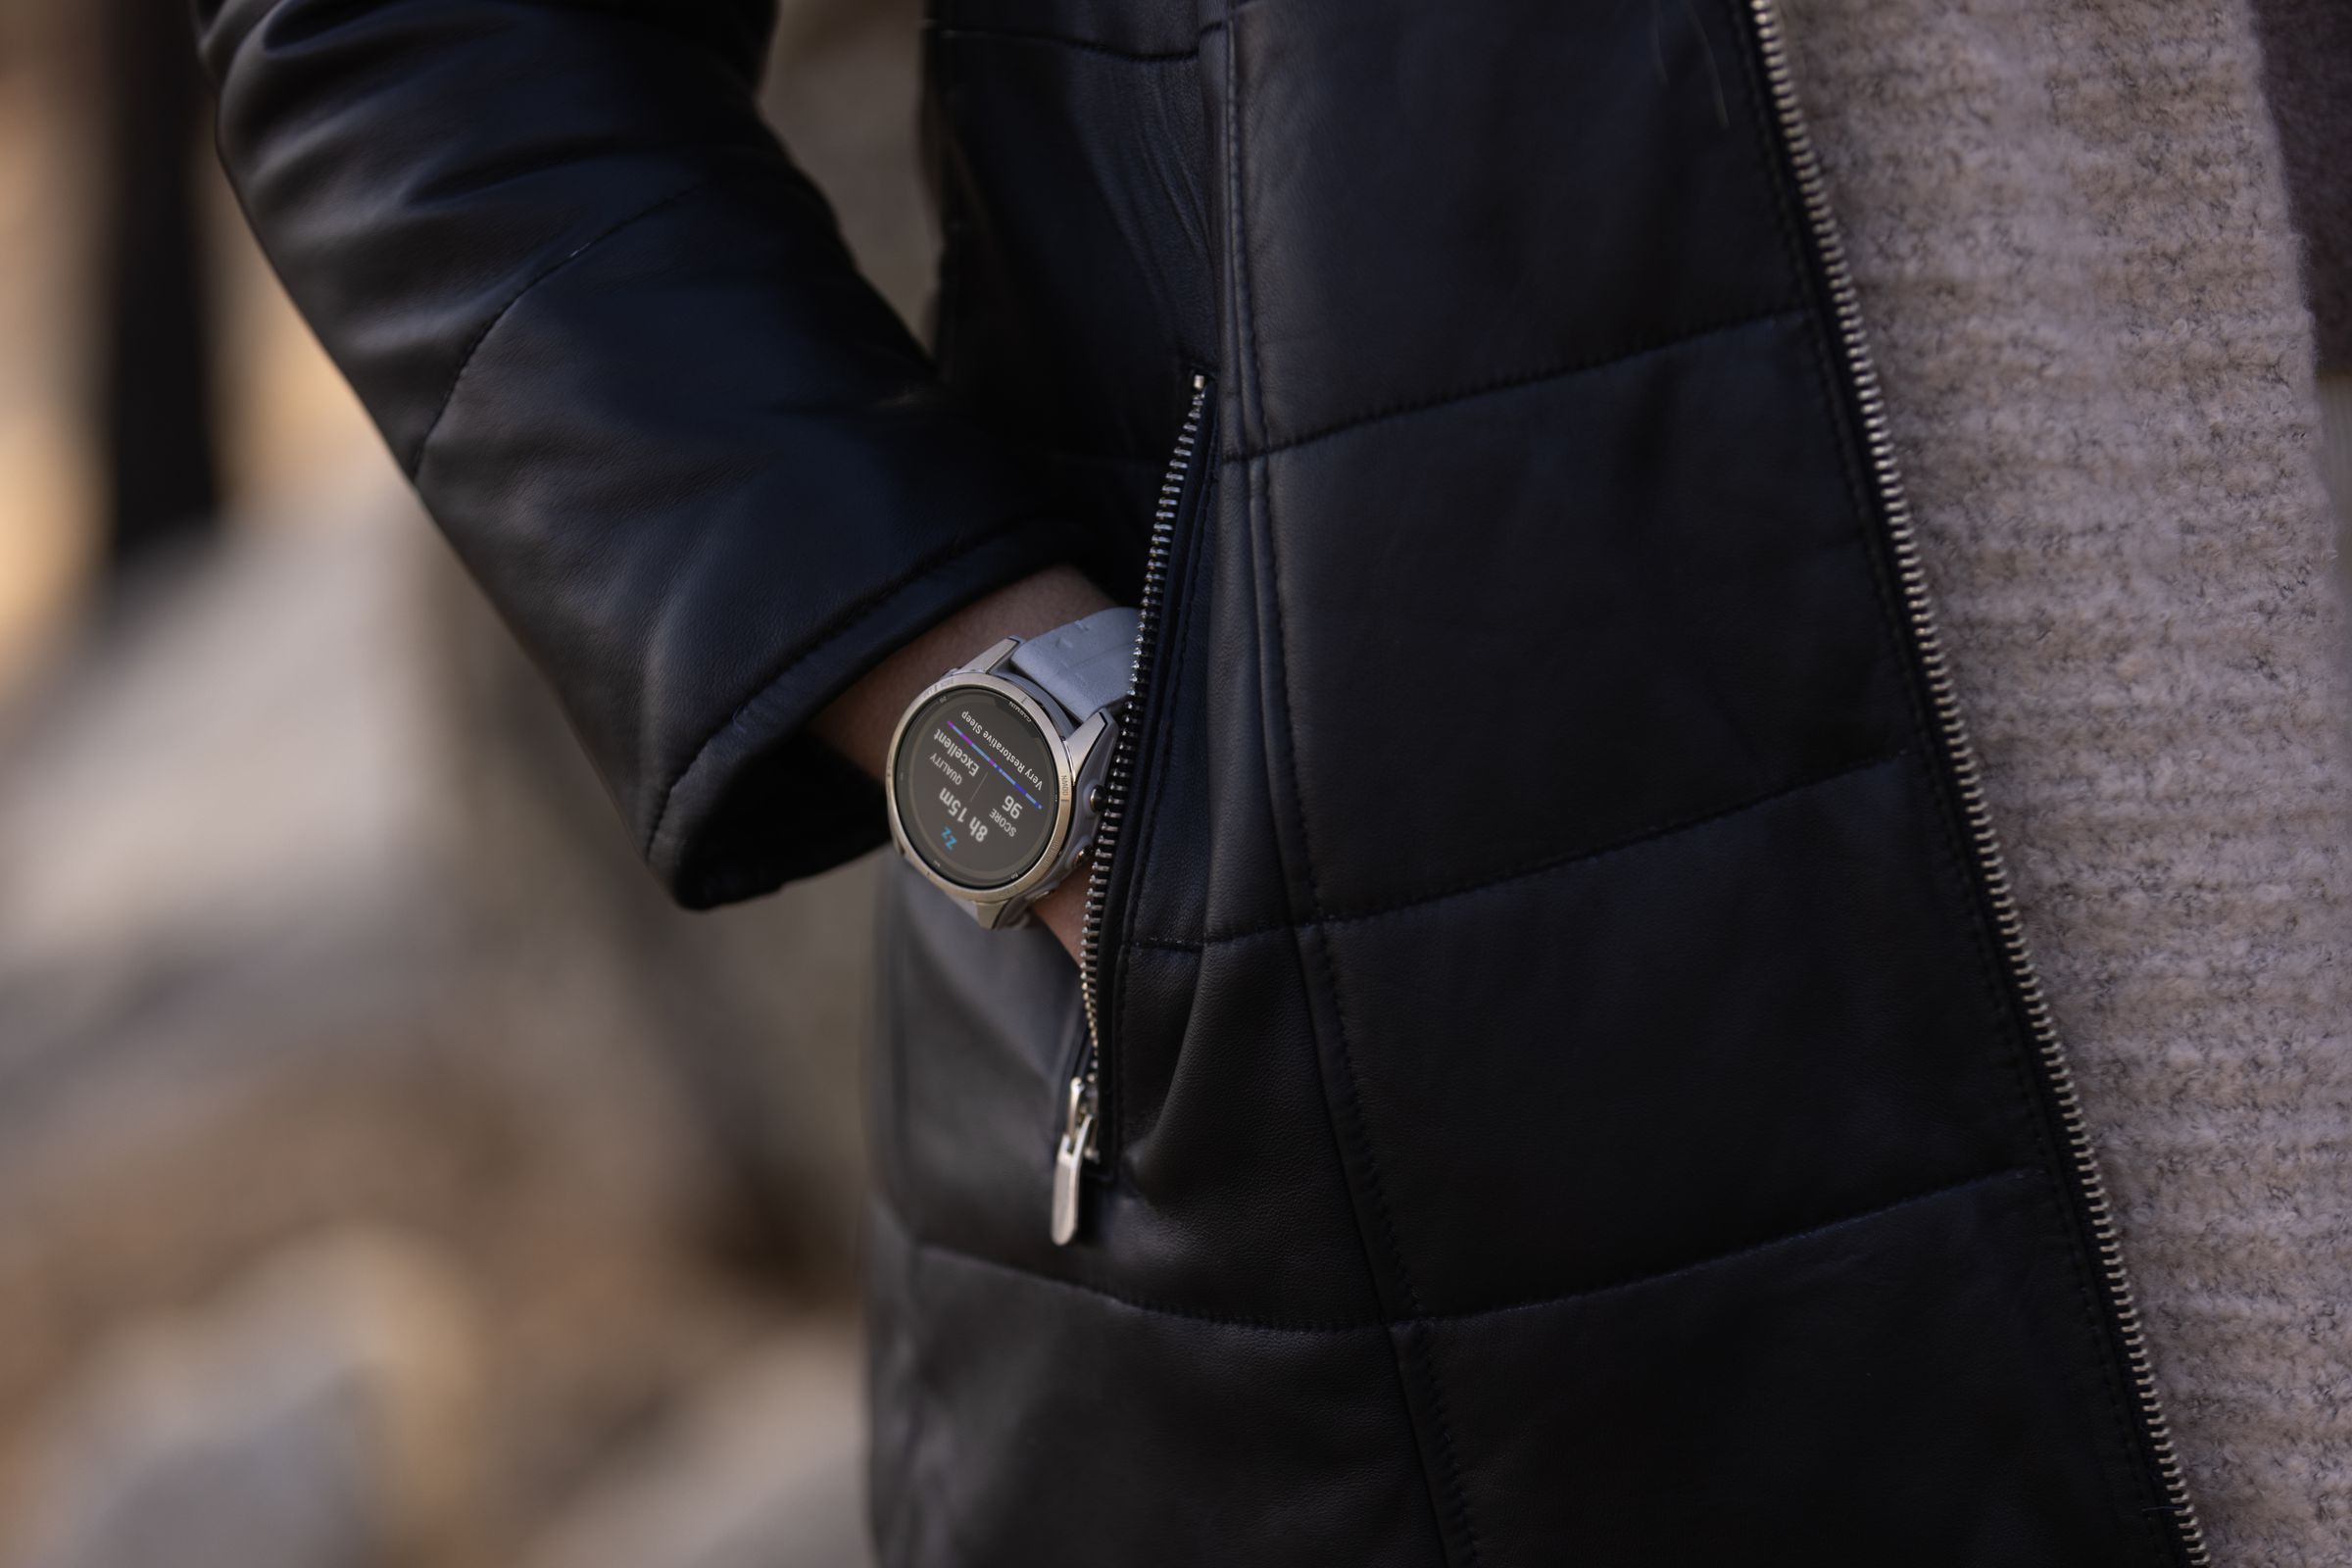 Close up of the Fenix 7 Pro worn on a wrist as someone puts their hand in a jacket pocket